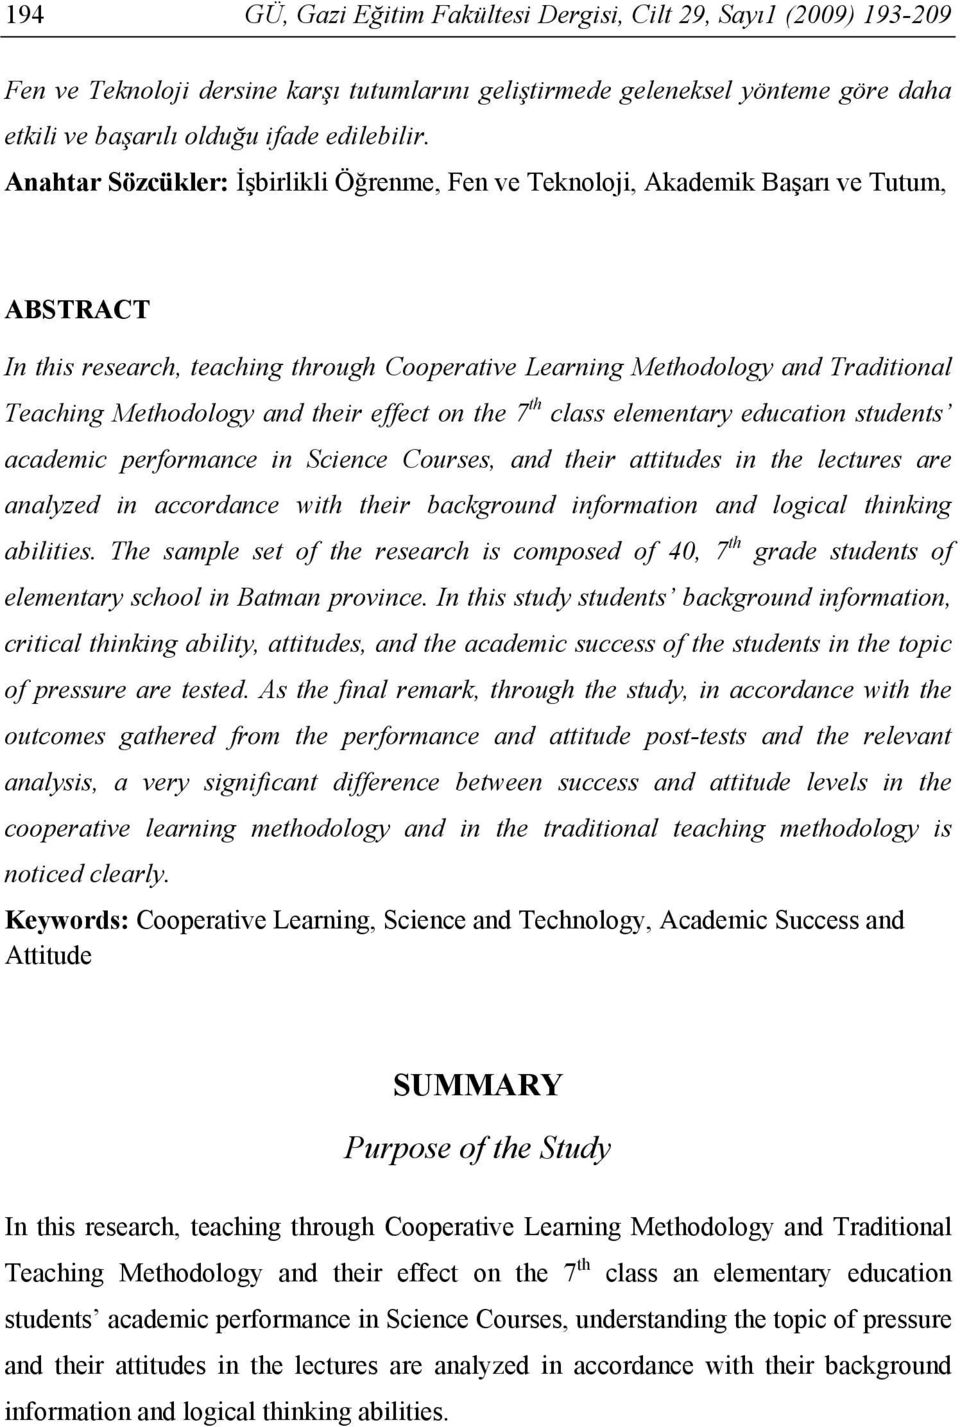 and their effect on the 7 th class elementary education students academic performance in Science Courses, and their attitudes in the lectures are analyzed in accordance with their background